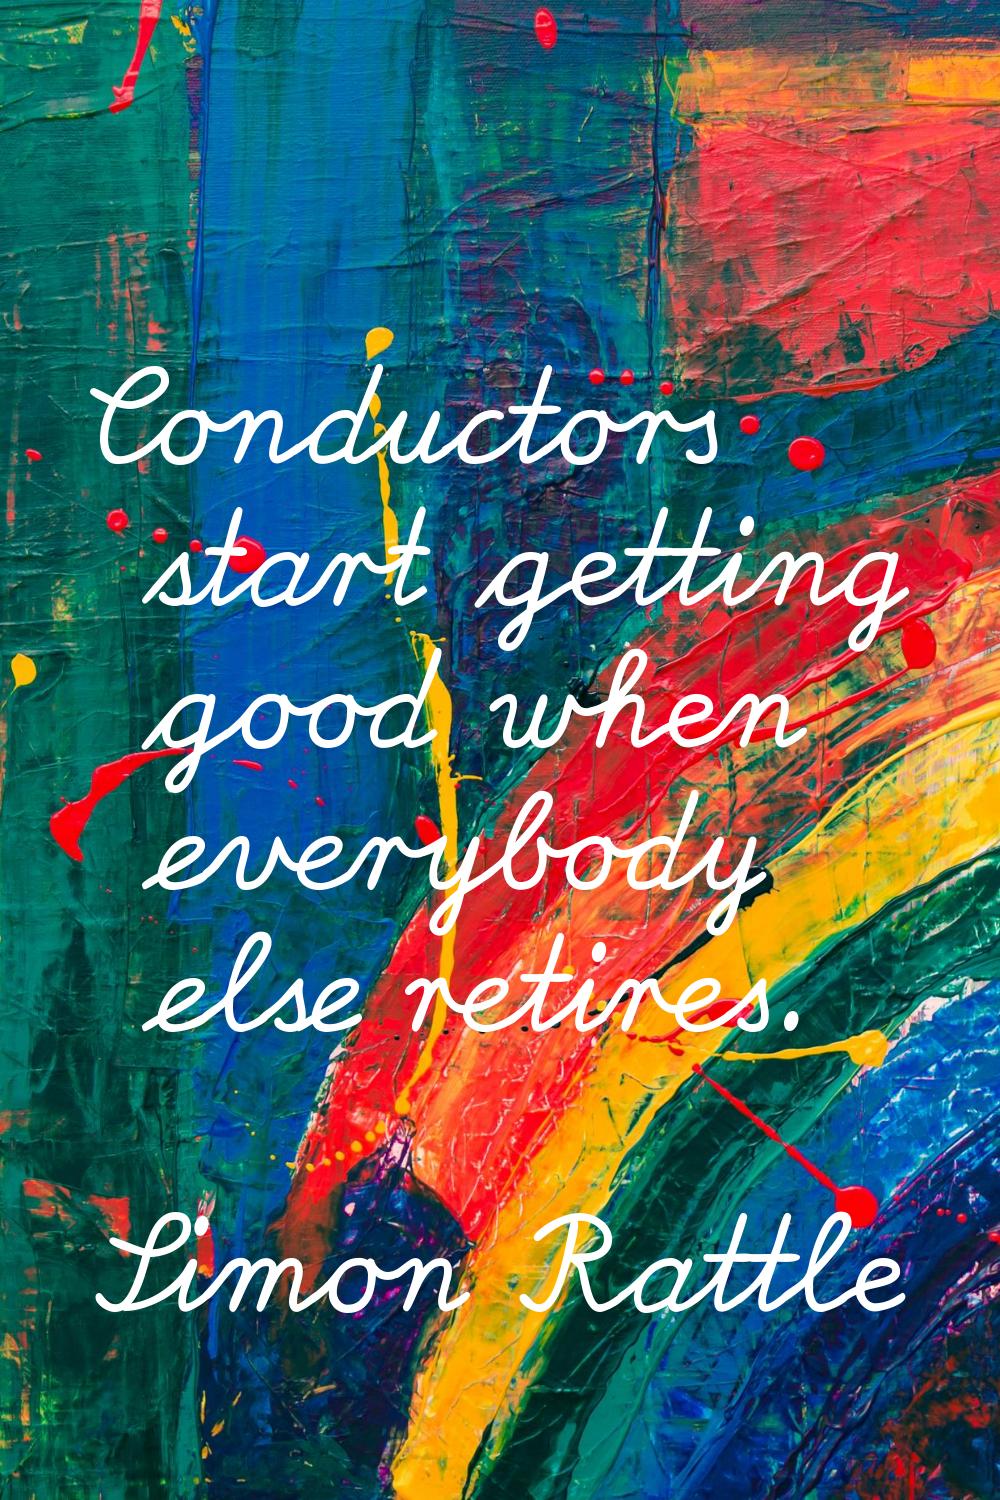 Conductors start getting good when everybody else retires.